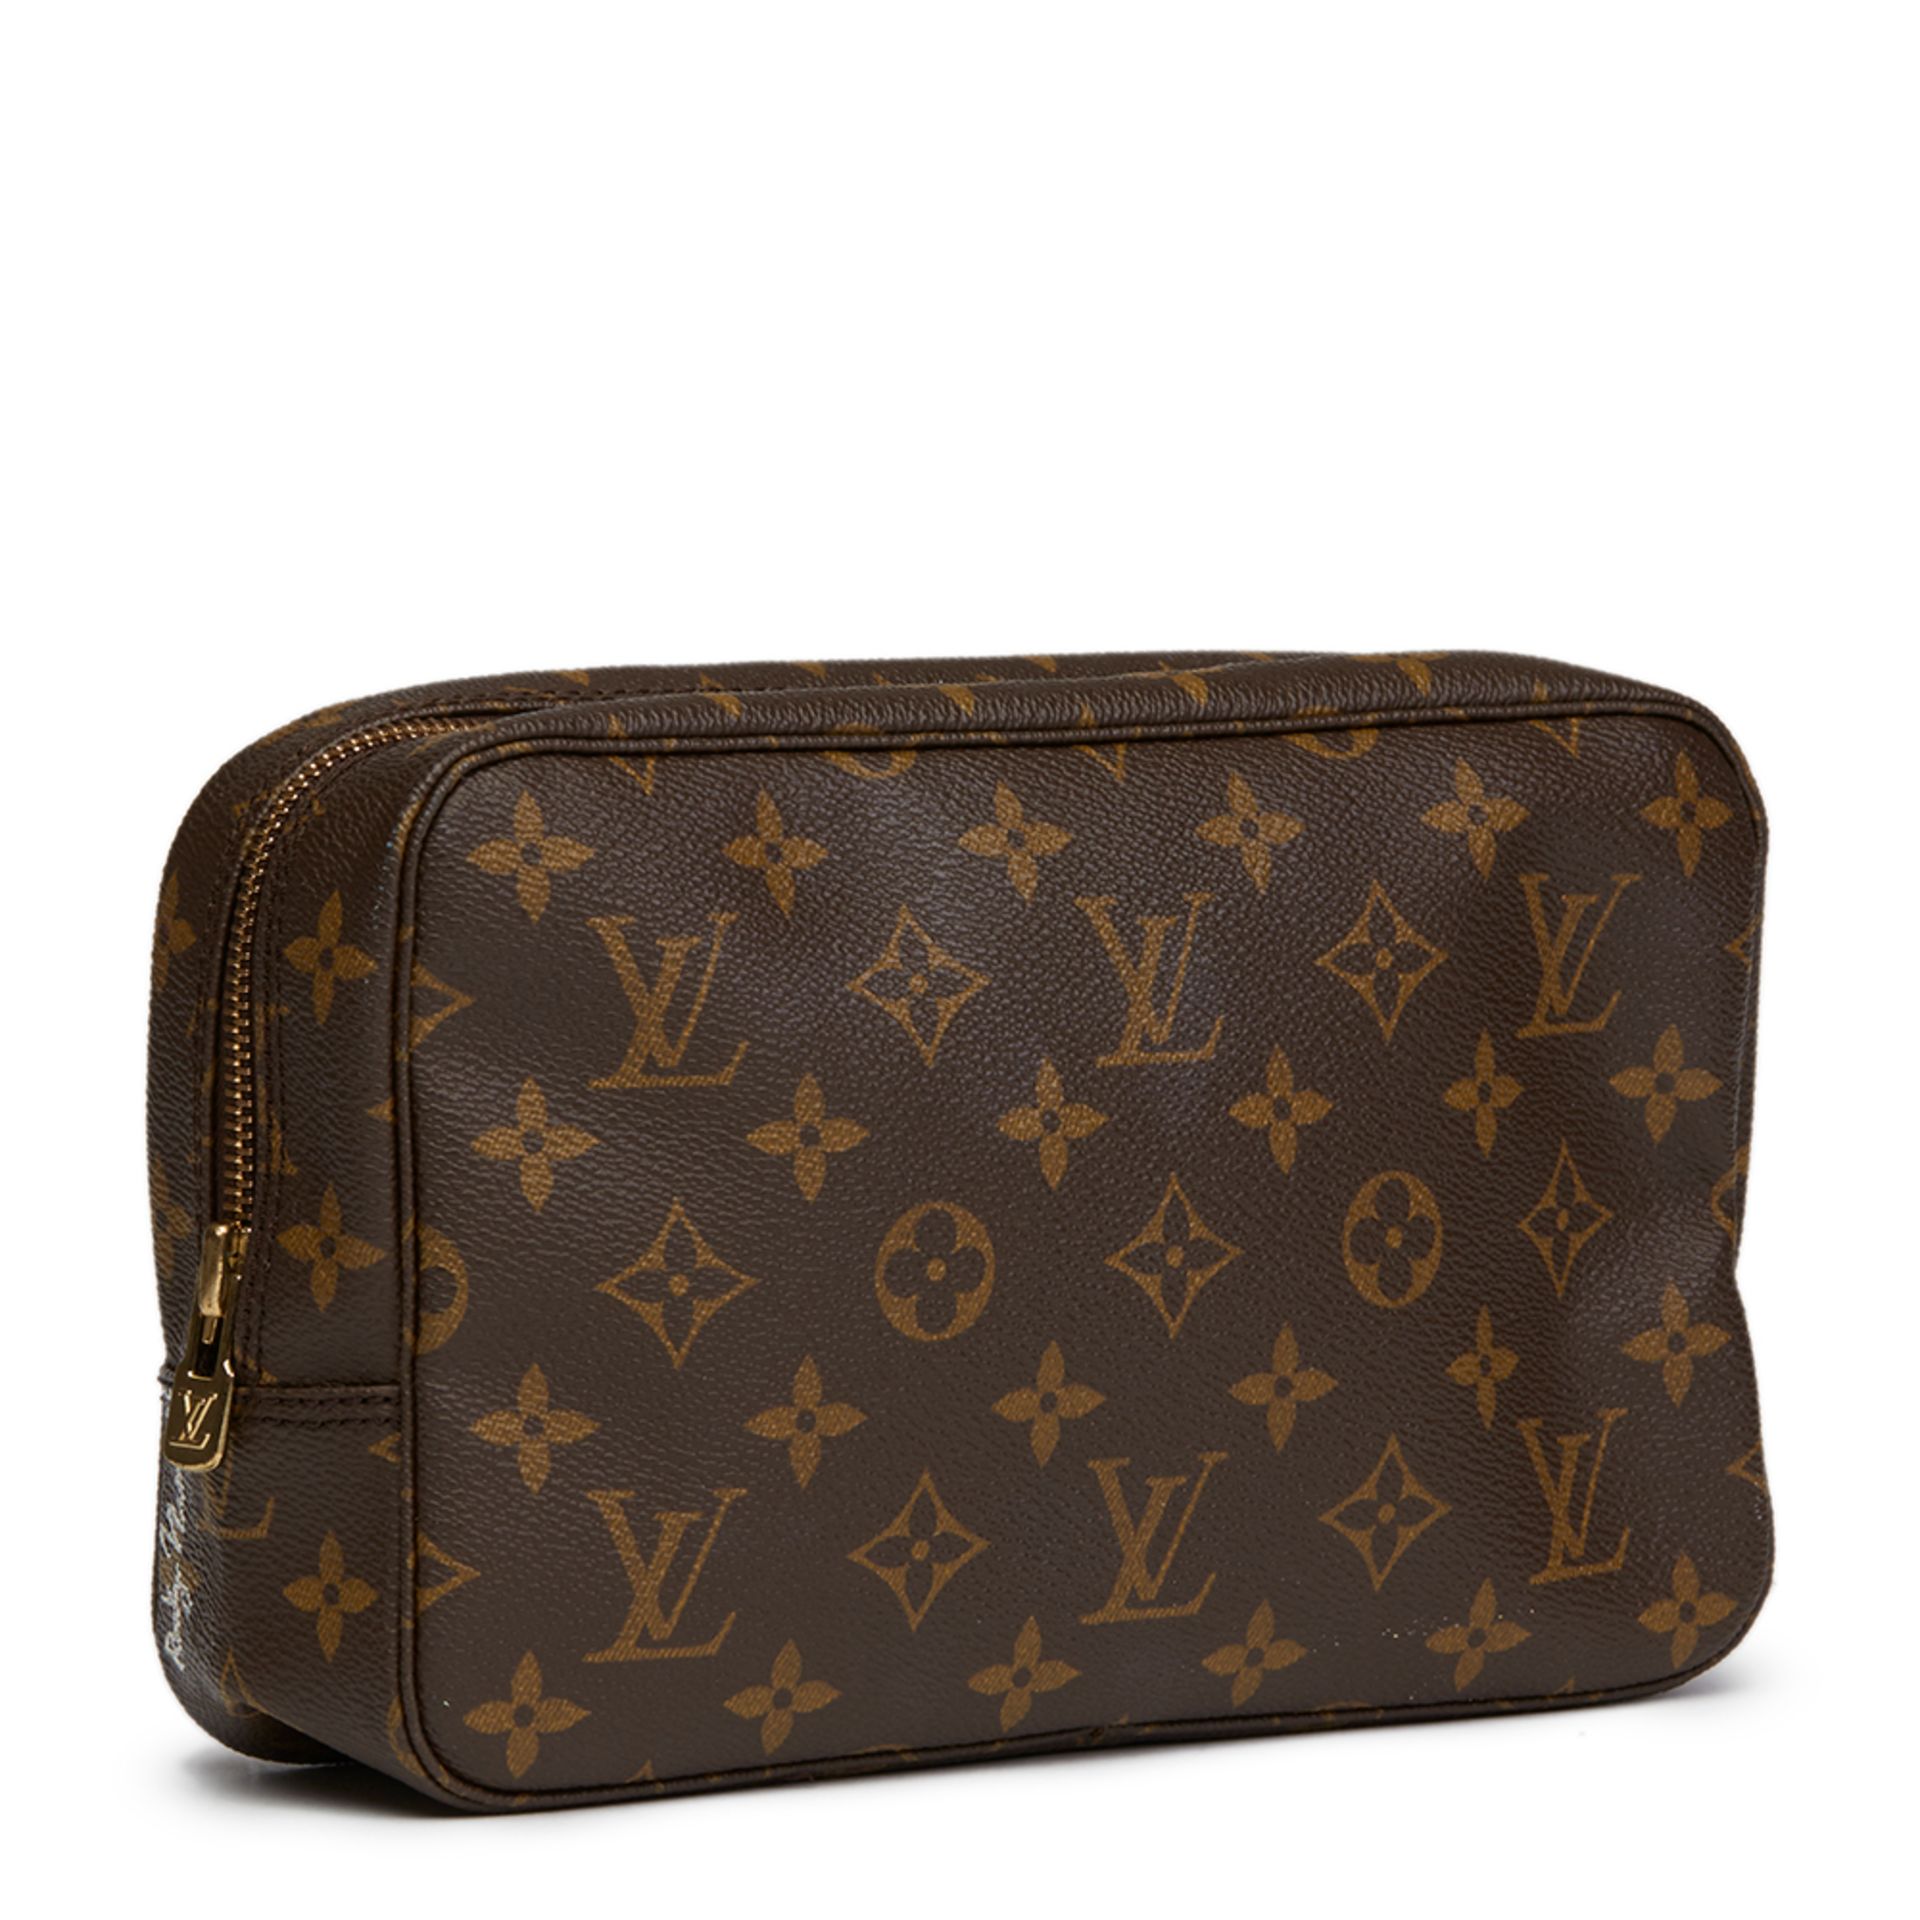 Louis Vuitton Hand-painted 'Sick of it all' X Year Zero London Toiletry Pouch - Image 9 of 11